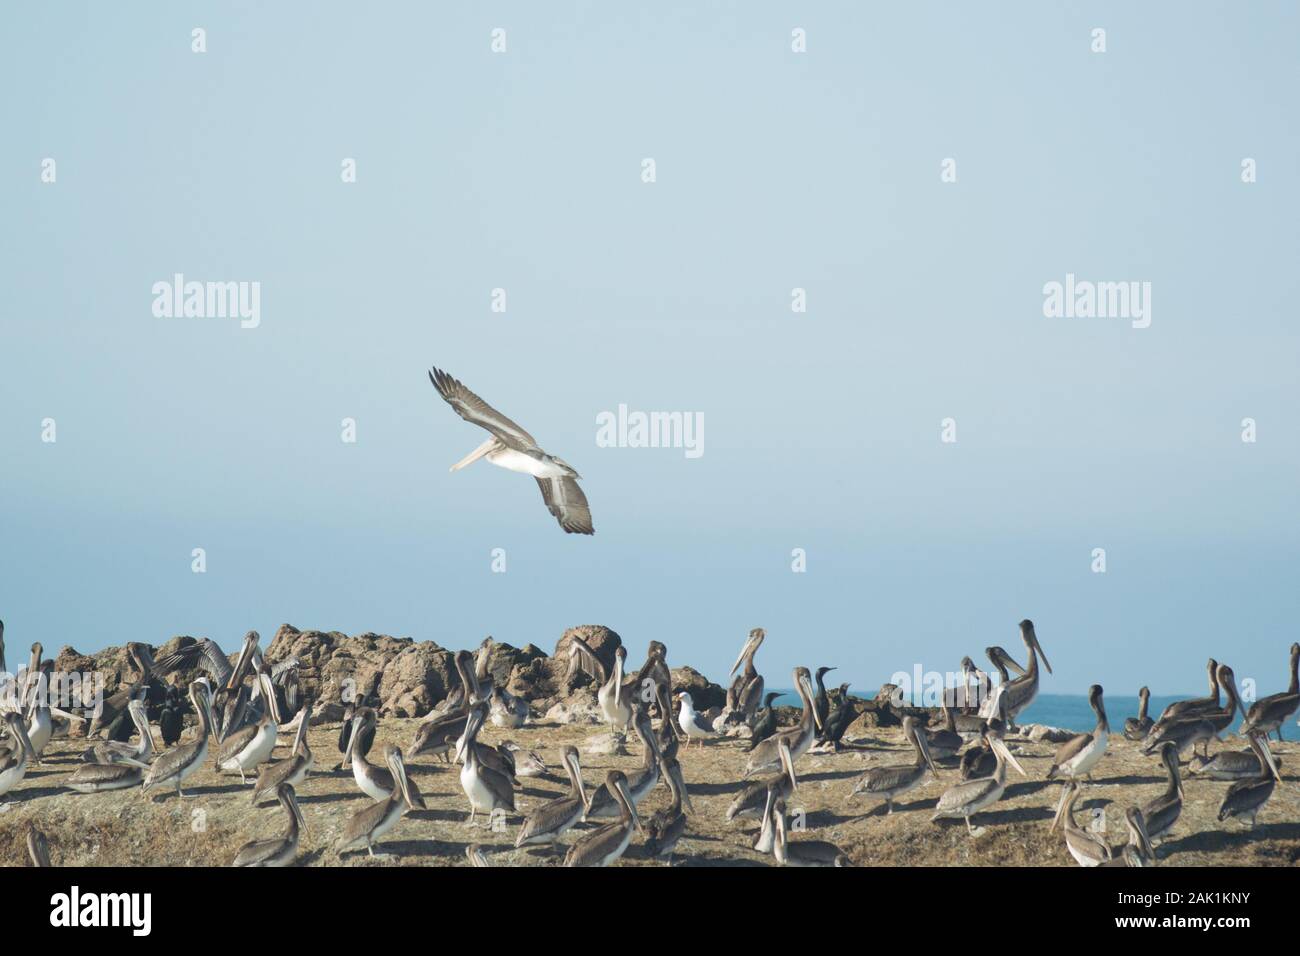 Large flock of Brown Pelicans on a rock in Pacific Ocean. One pelican coming in to land. Stock Photo